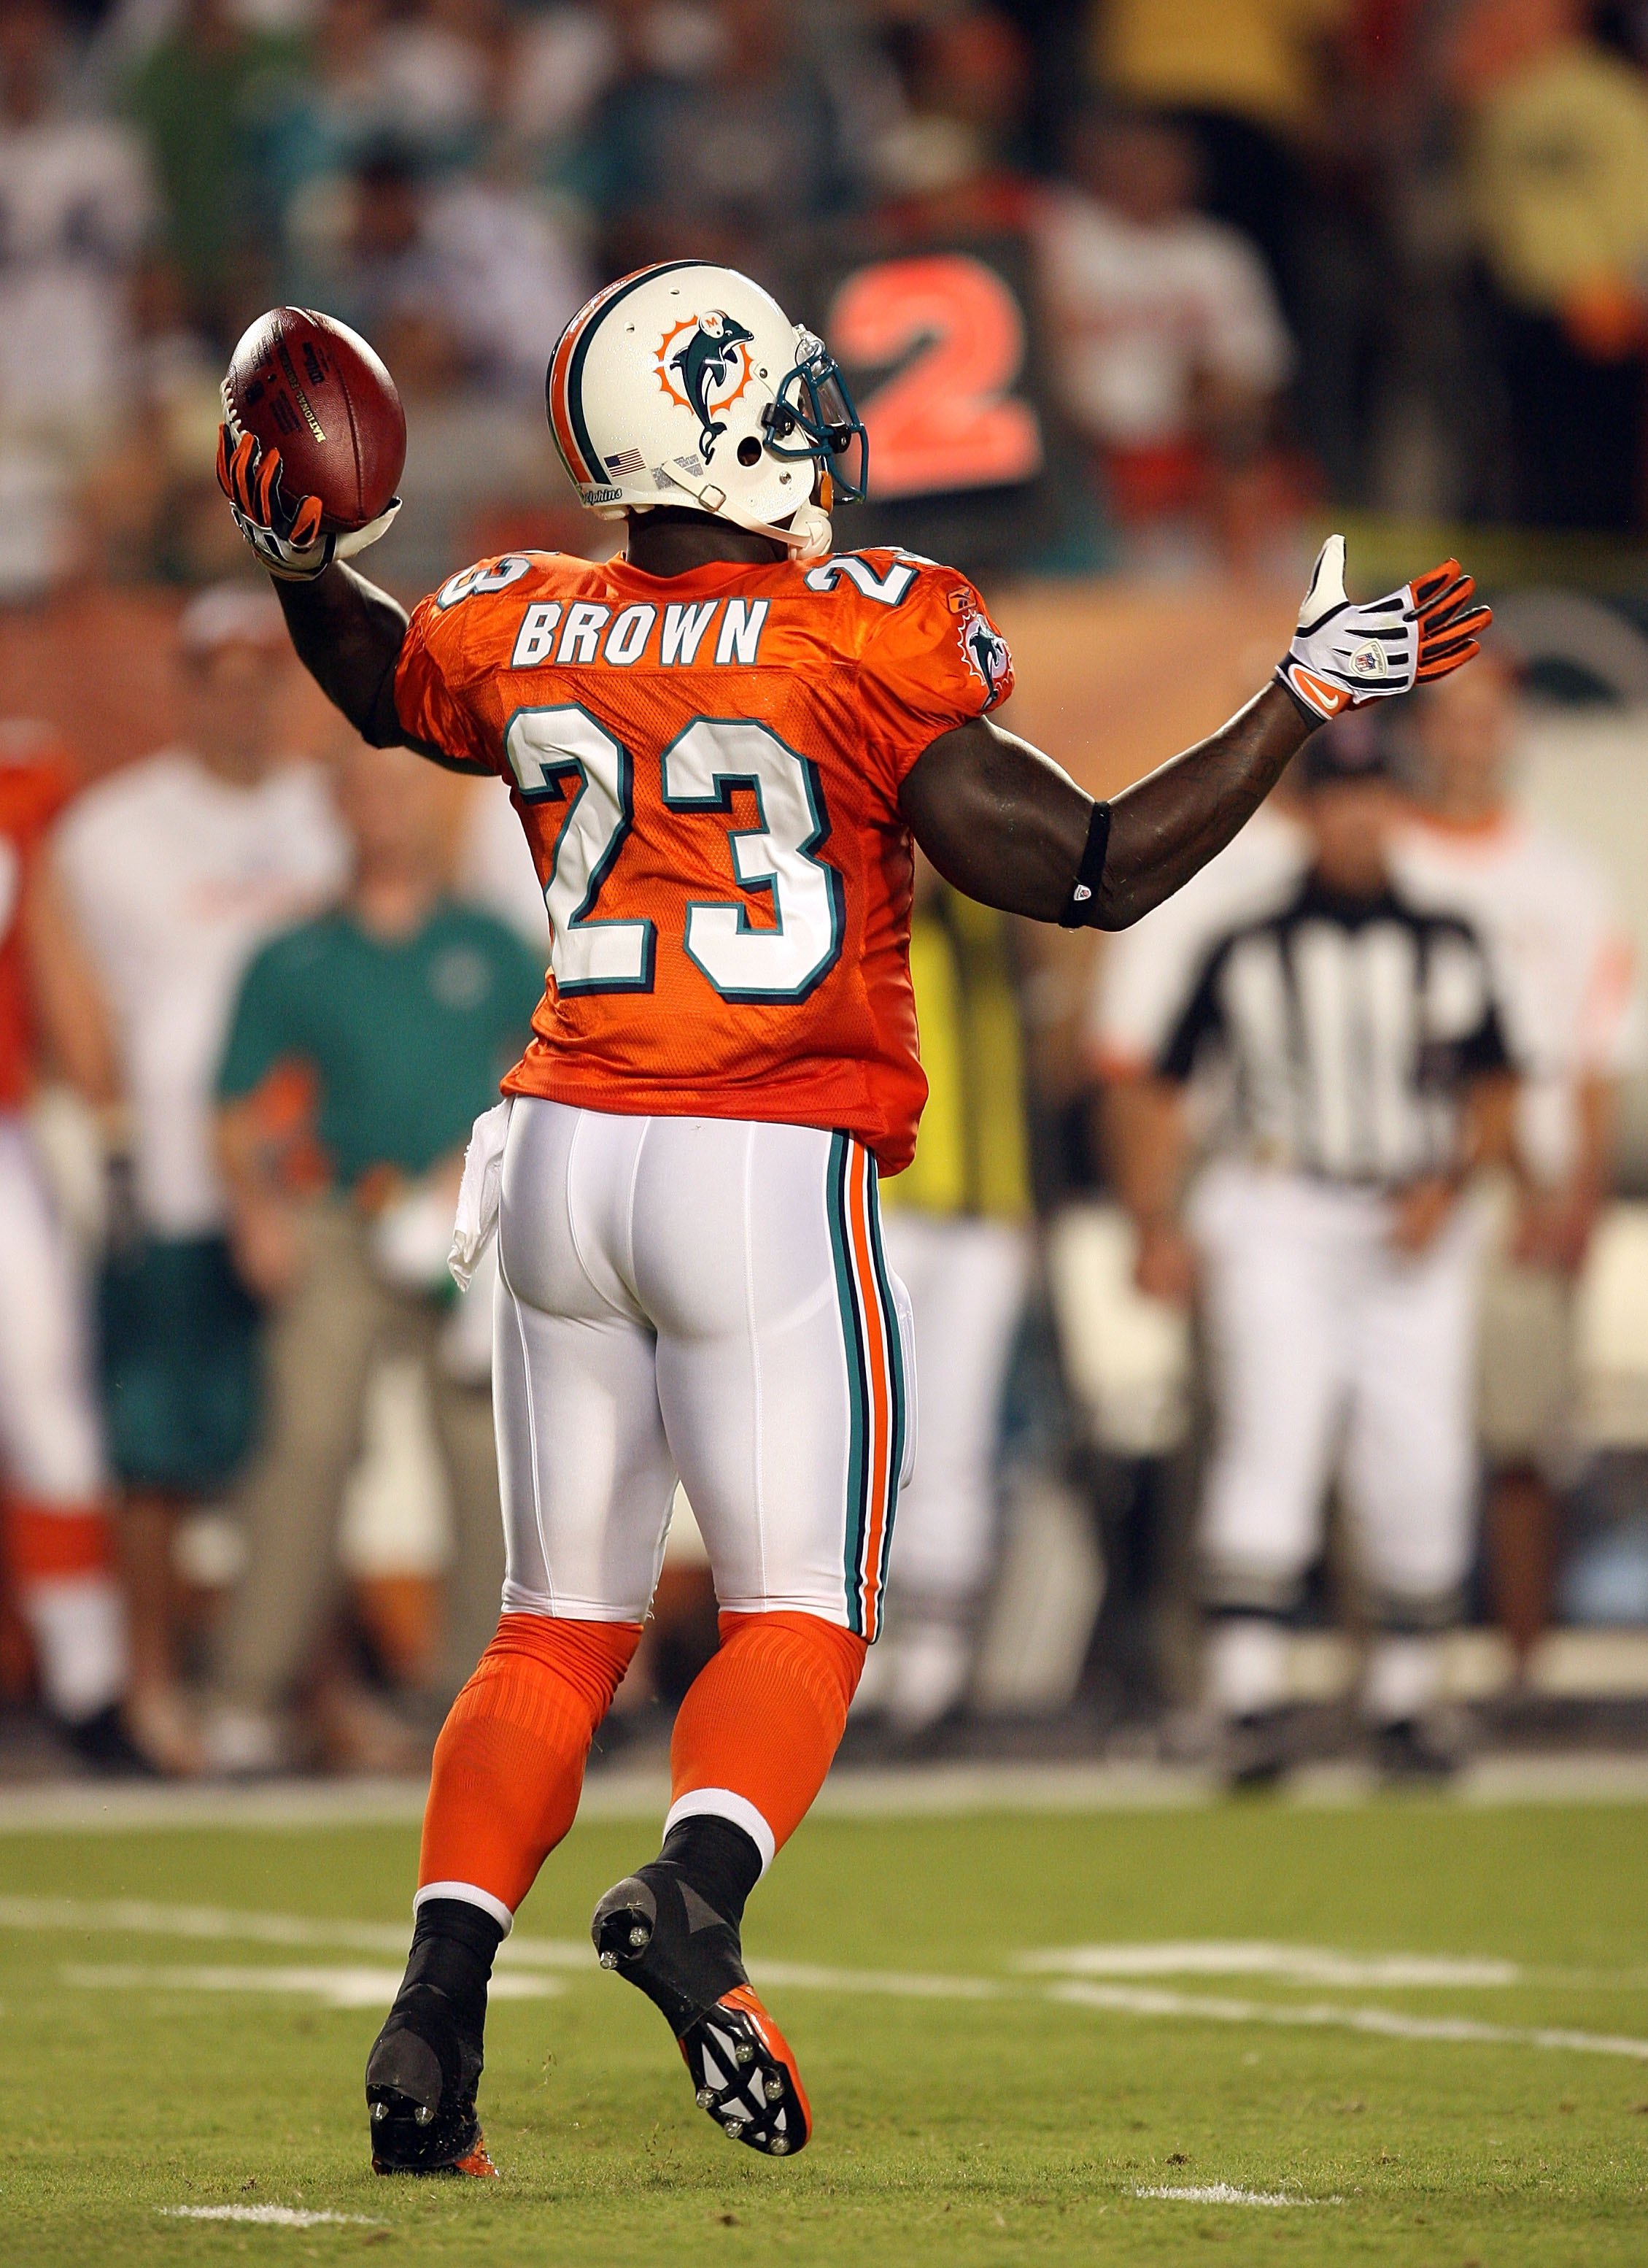 Ronnie Brown Wildcat formation jersey